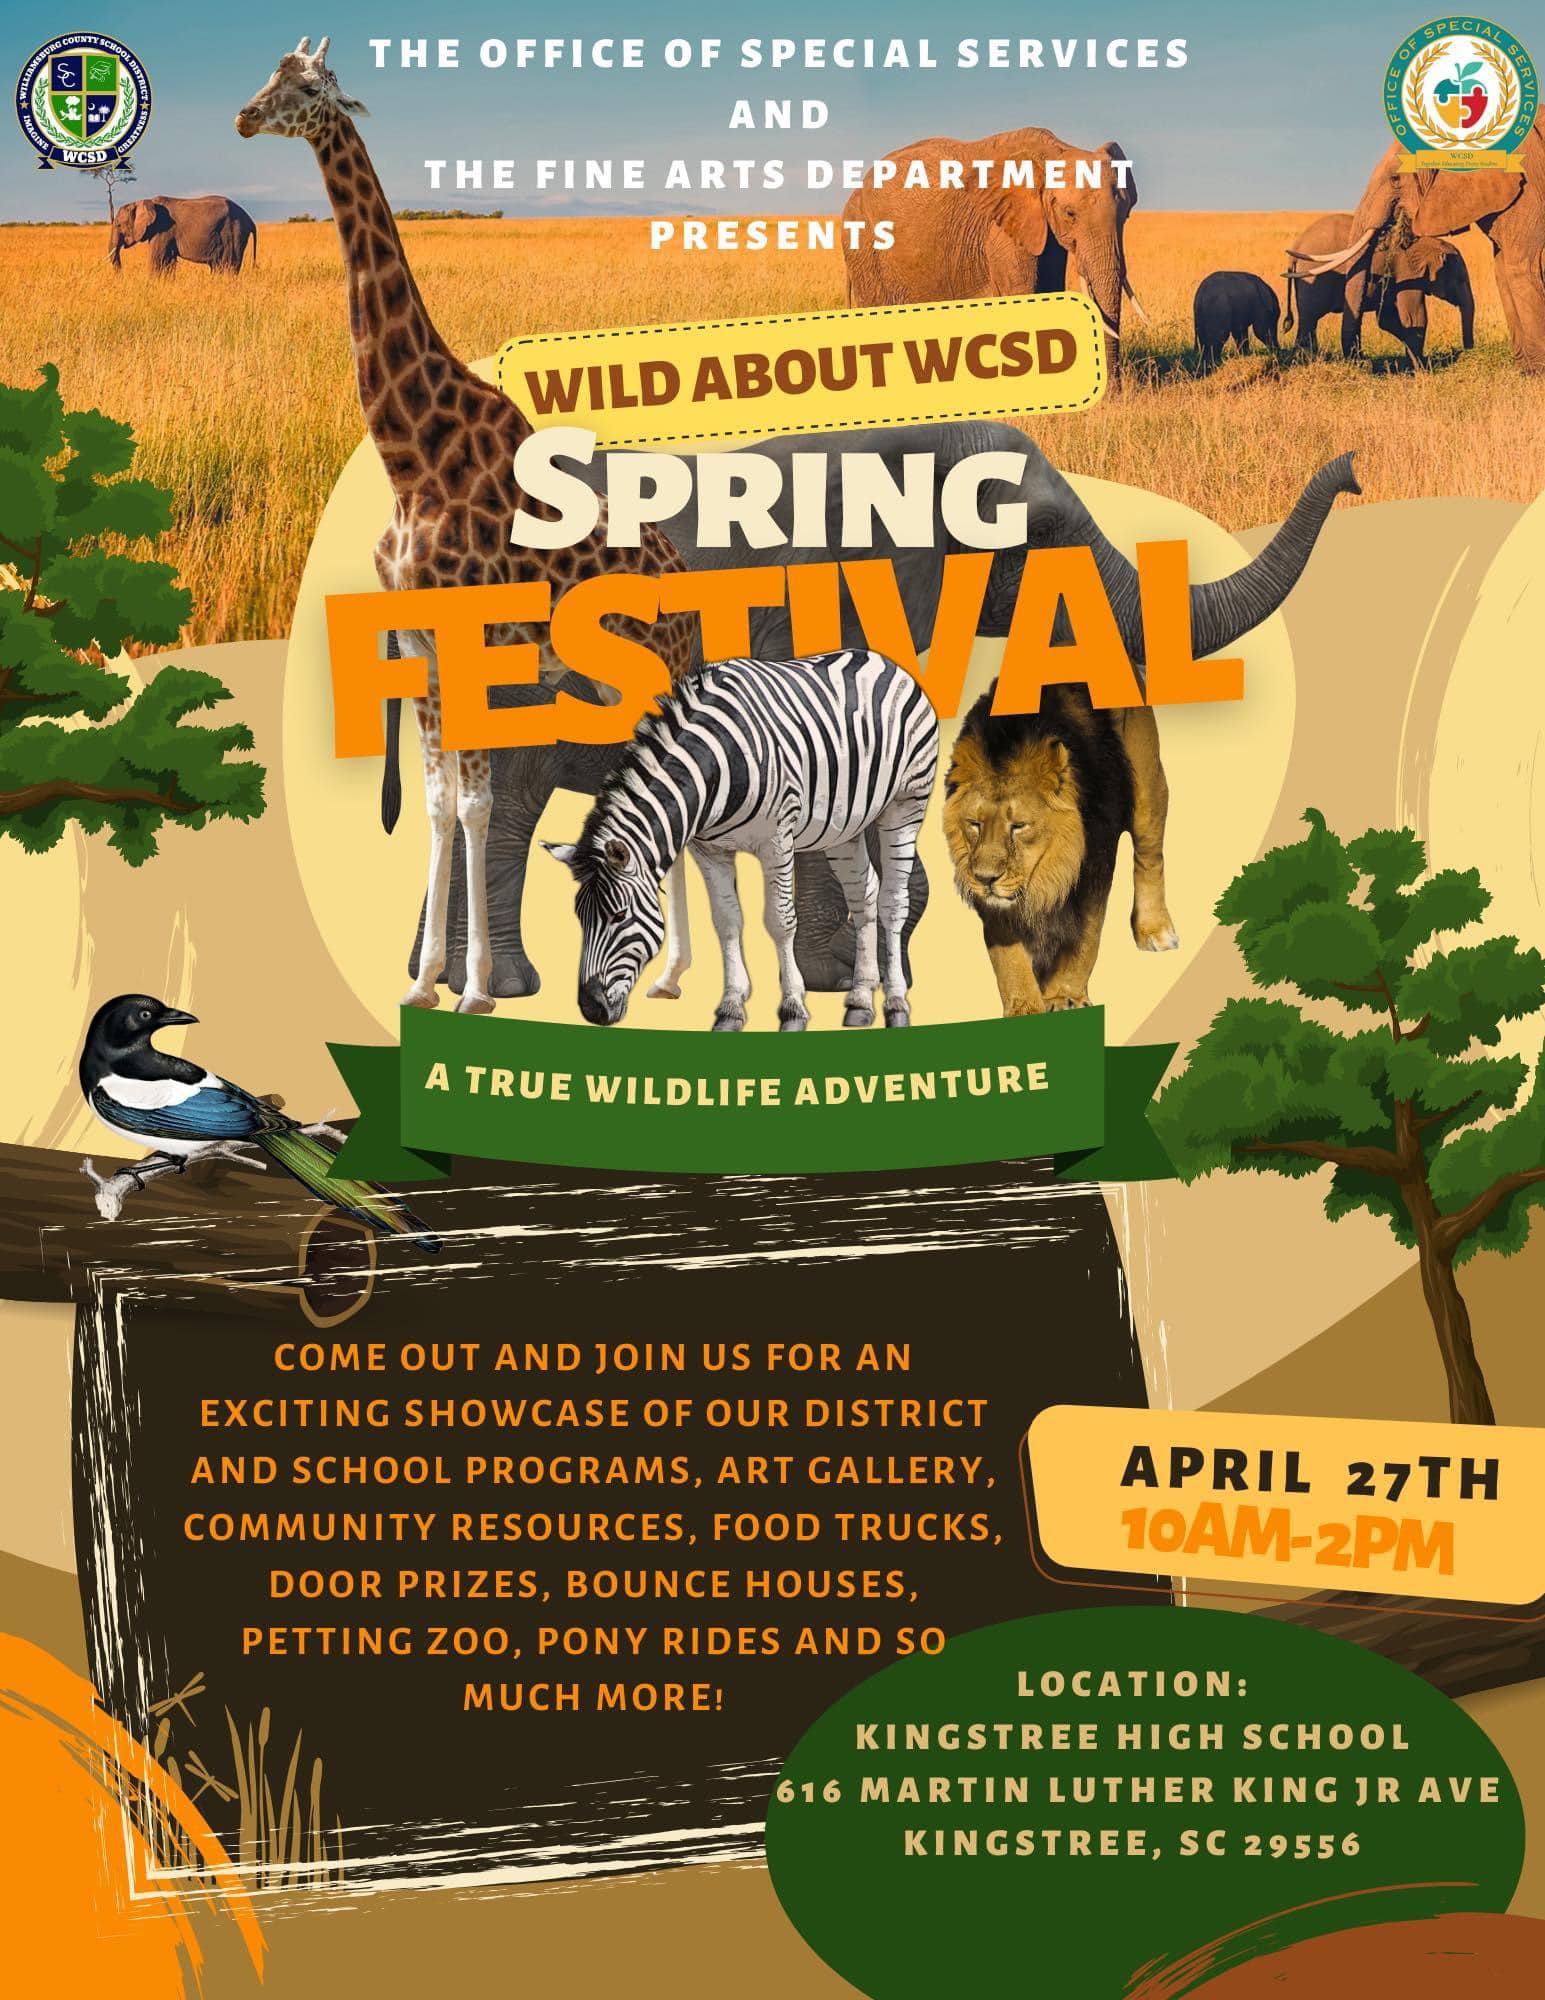 The Office of Special Services and The Fine Arts Department Presents "Wild About WCSD" Spring Festival A True Wildlife Adventure. Come out and join us for an exciting showcase of our district and school programs, art gallery, community resources, food trucks, door prizes, bounce houses, petting zoo, pony rides, and so much more! April 27th 10 am-2 pm. Location: Kingstree High School 616 Martin Luther King Jr. Ave Kingstree, SC 29556 